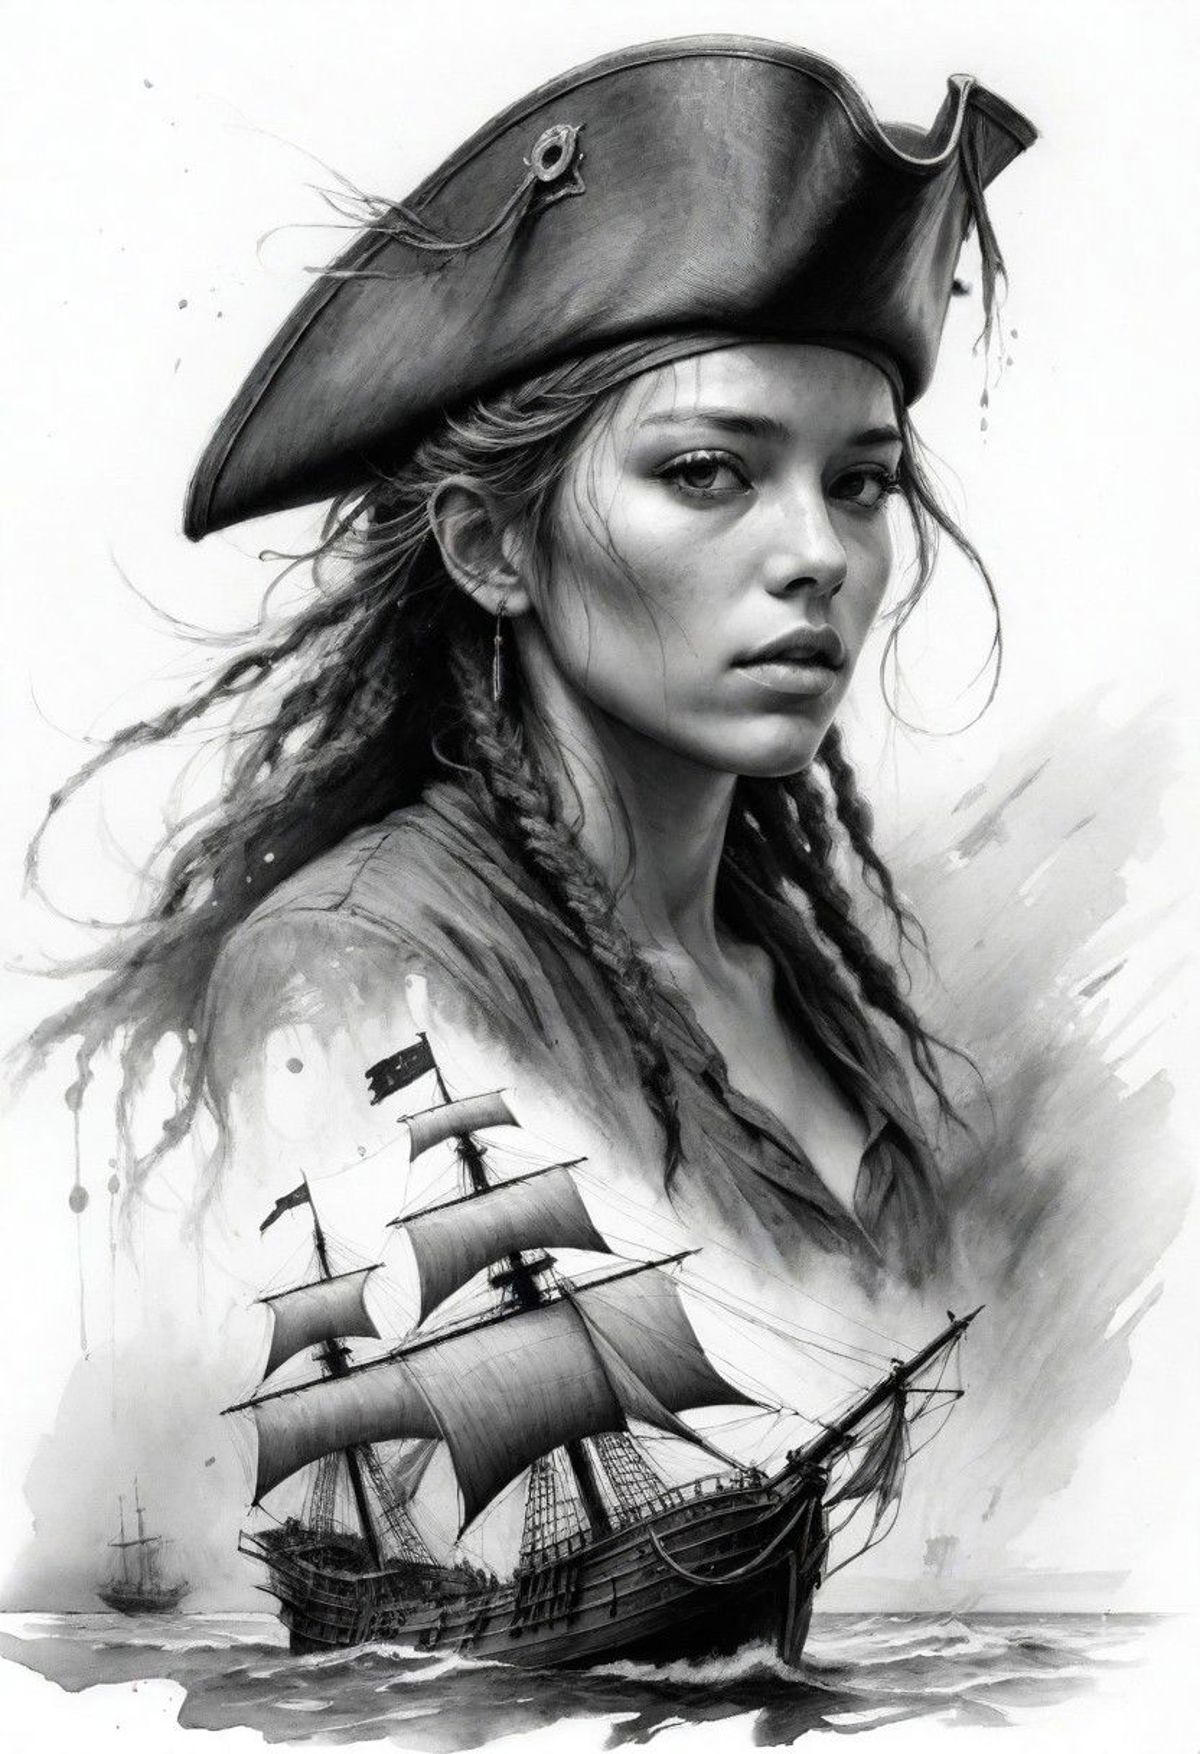 A girl with long braids, a pirate hat, and a painting of a sailboat in the background.